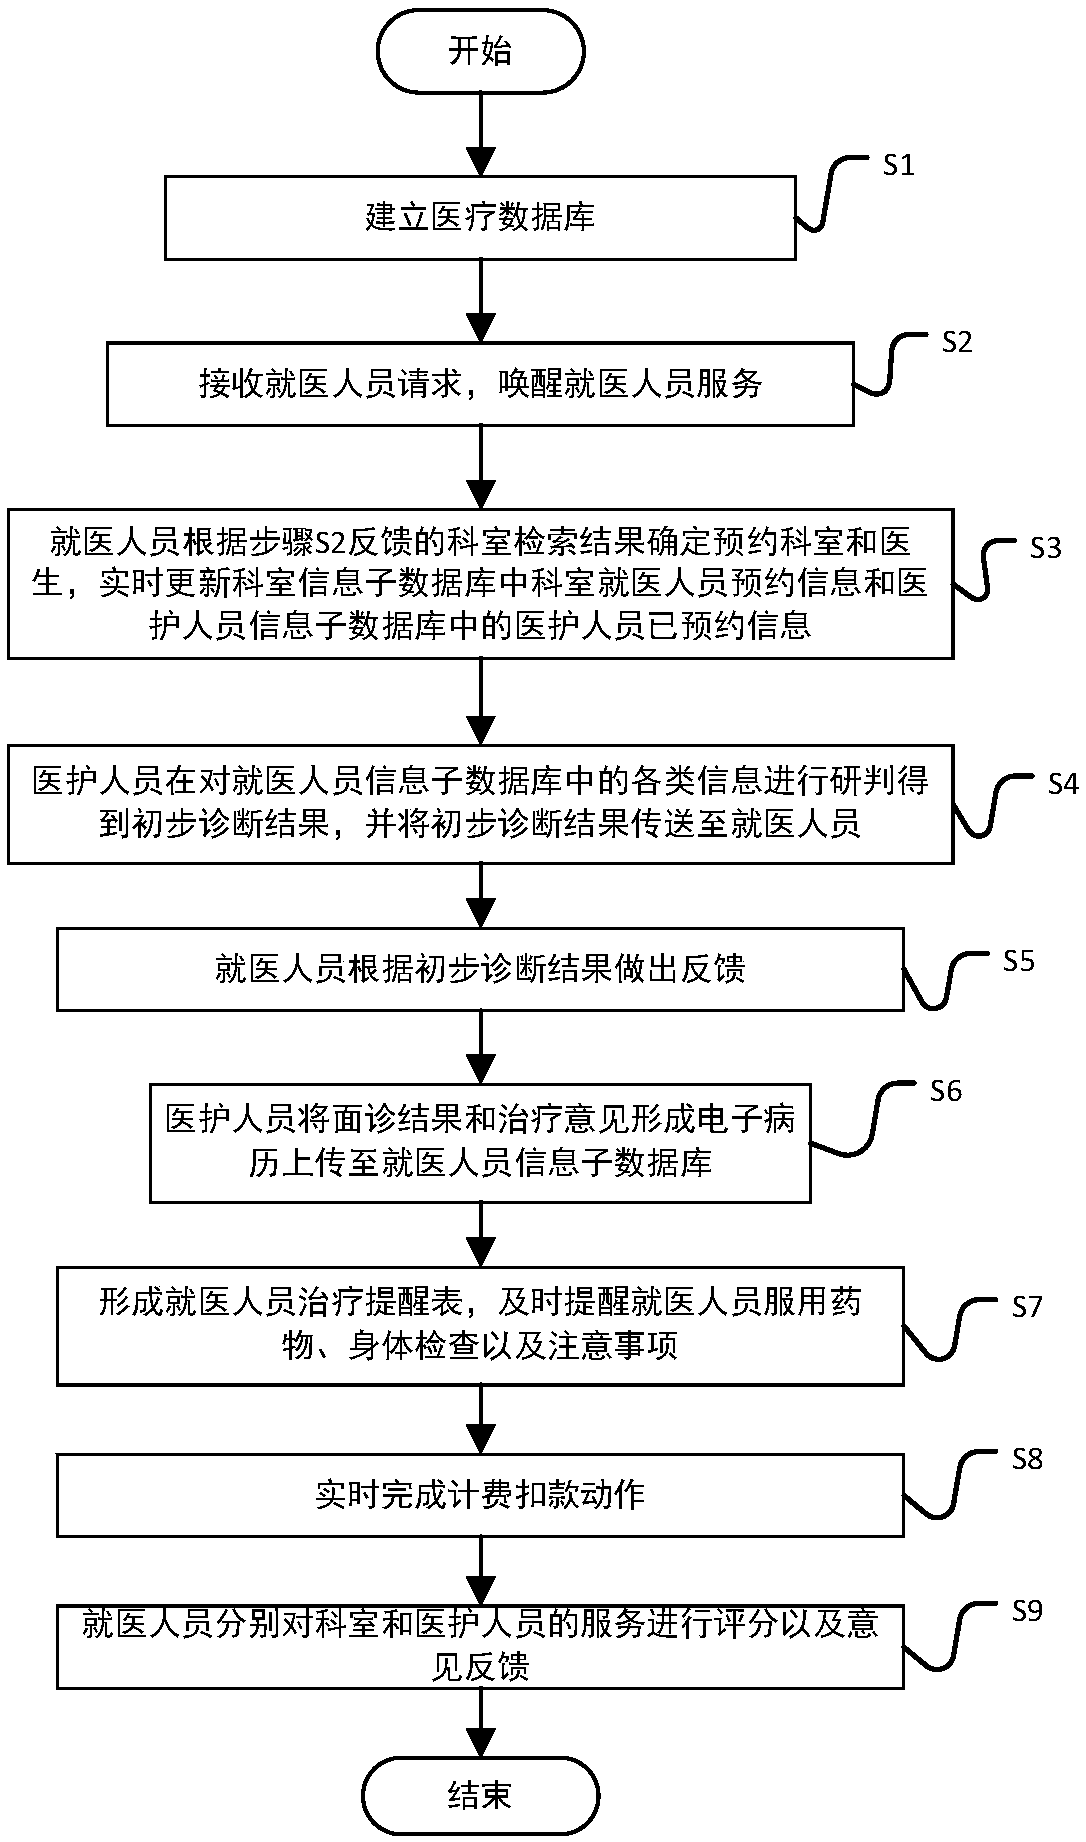 Mobile internet based doctor-patient interaction method and system